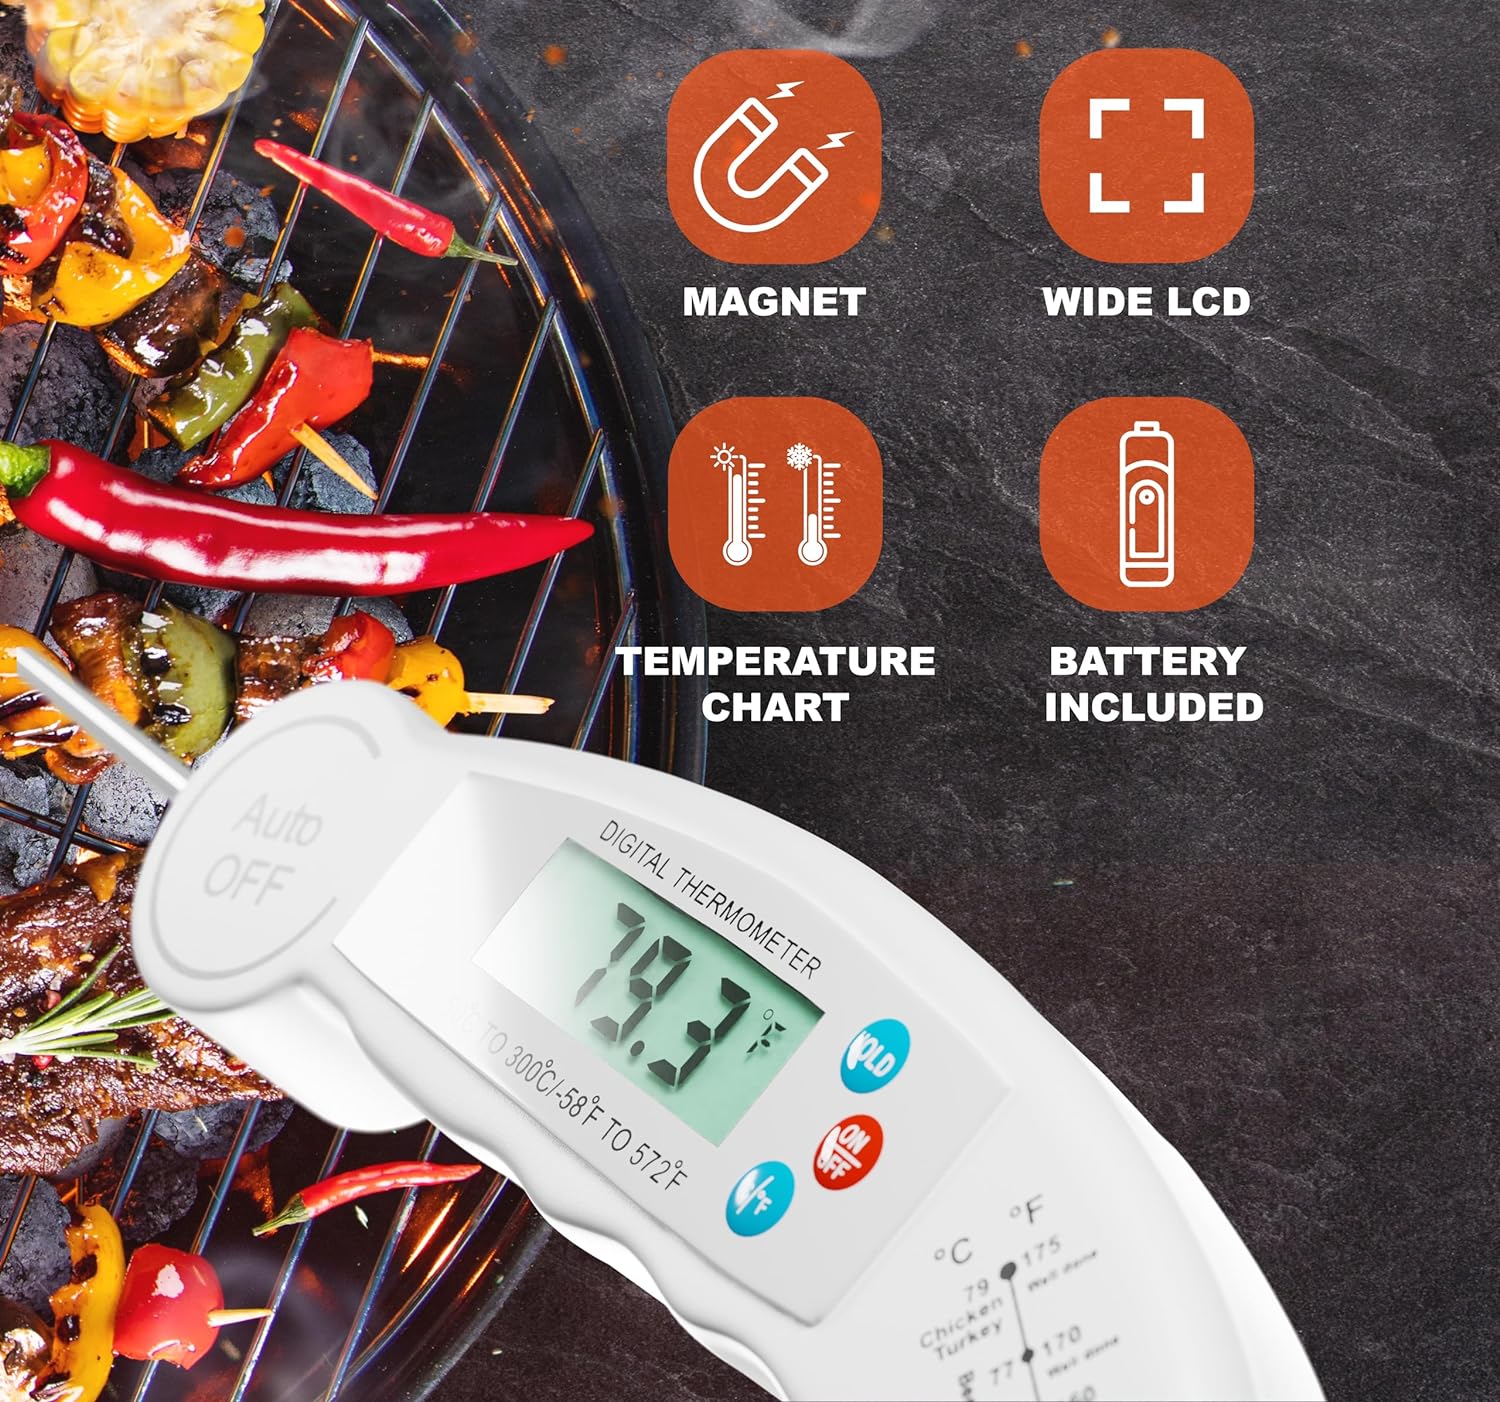 Meat Thermometer Digital - Food Thermometer for Cooking and Baking, Grill Meat Temperature Probe, Liquids, BBQ, Chicken, Steak, Kitchen Gadgets and Grilling Accessories (White)